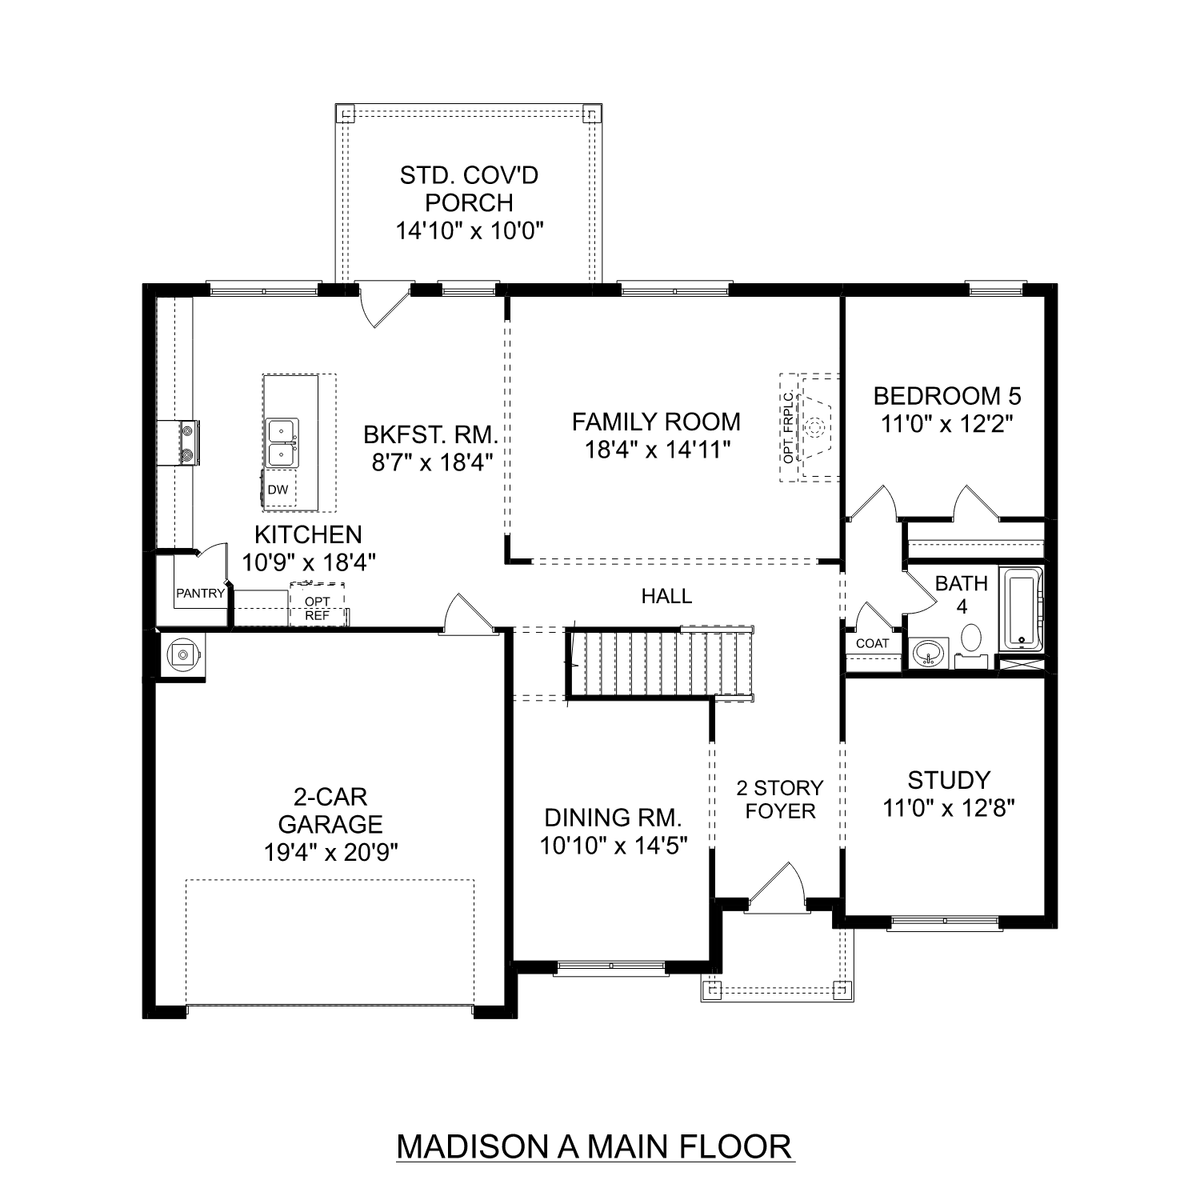 1 - The Madison A floor plan layout for 225 White Horse Way in Davidson Homes' Kendall Downs community.